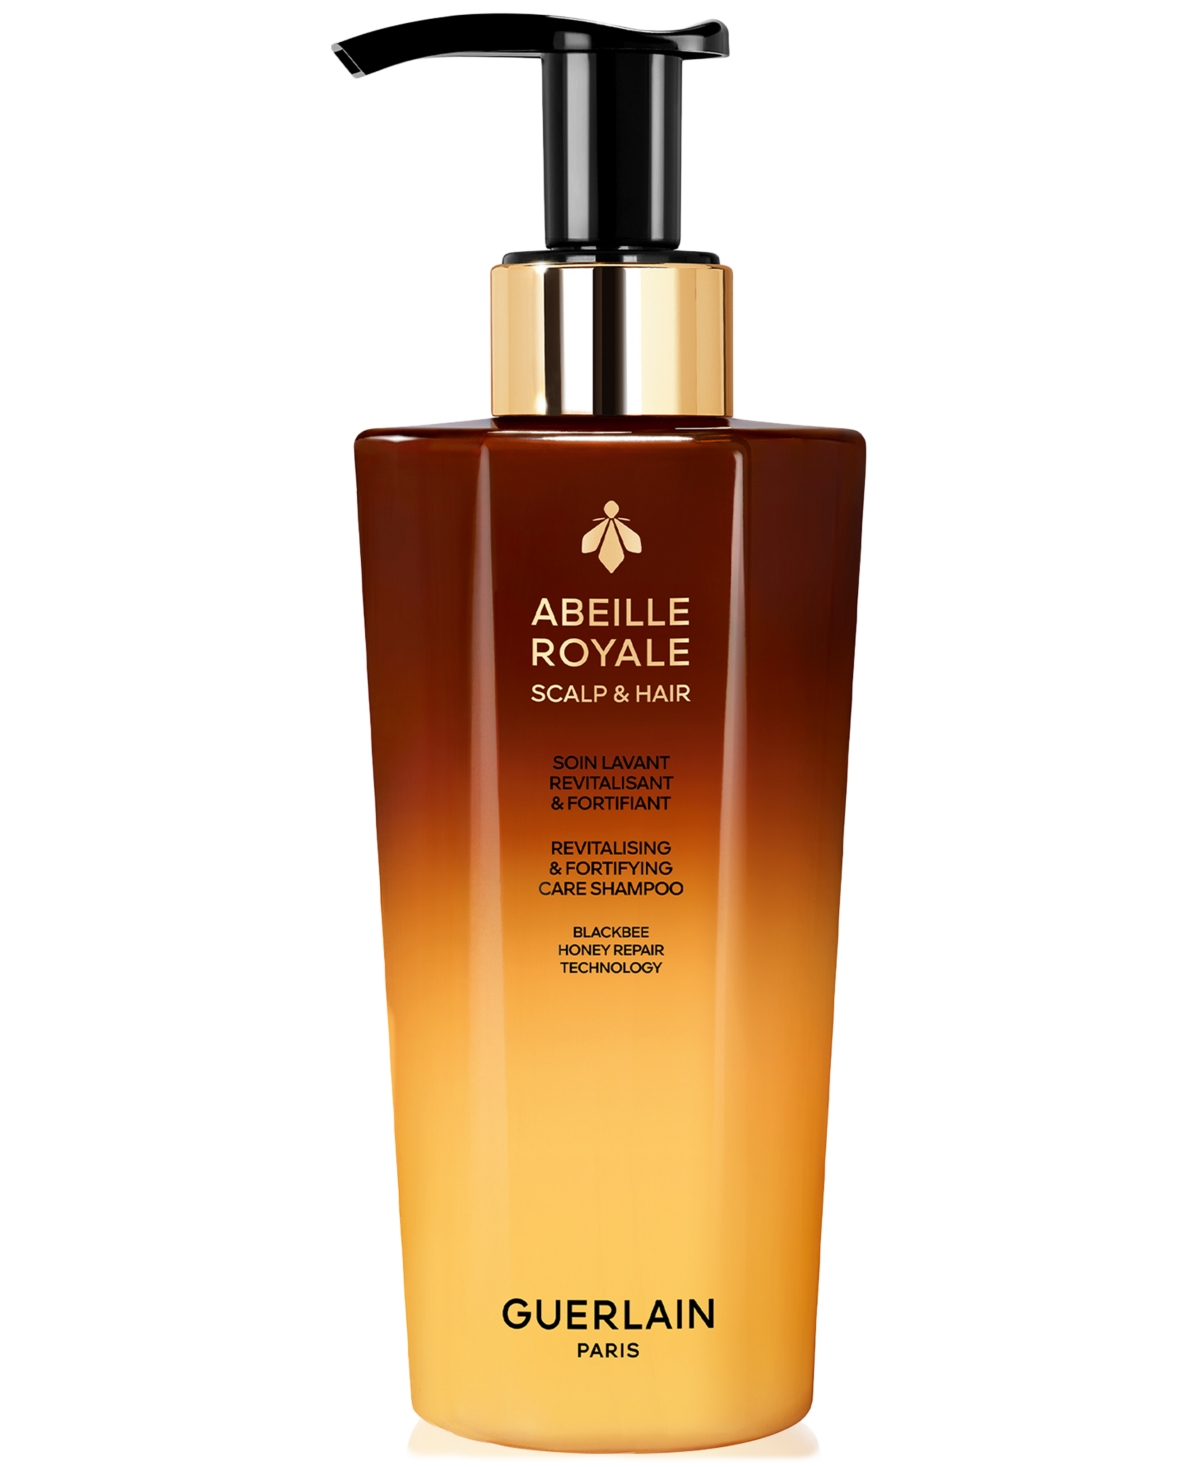 Abeille Royale Scalp & Hair Revitalizing & Fortifying Care Shampoo - N/a